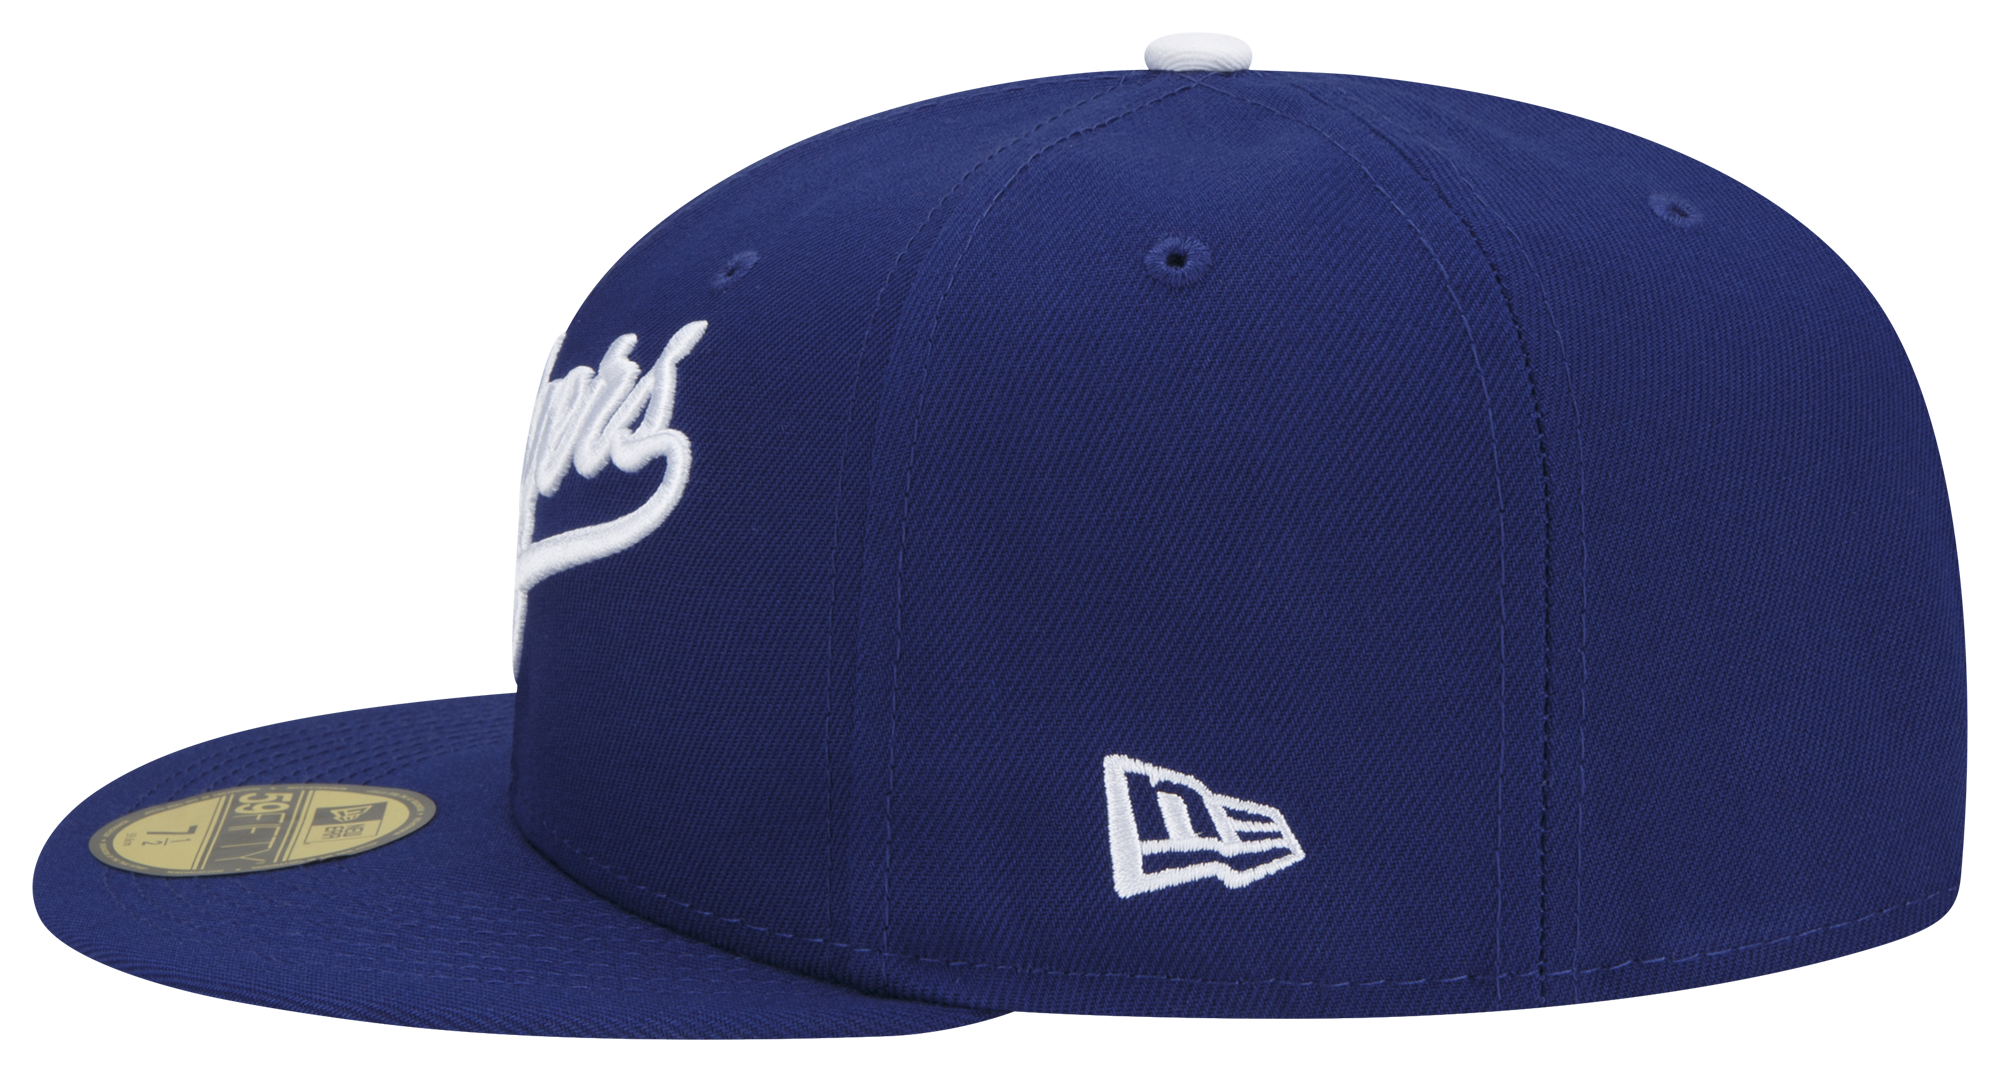 New Era Dodgers Logo White 59Fifty Fitted Cap